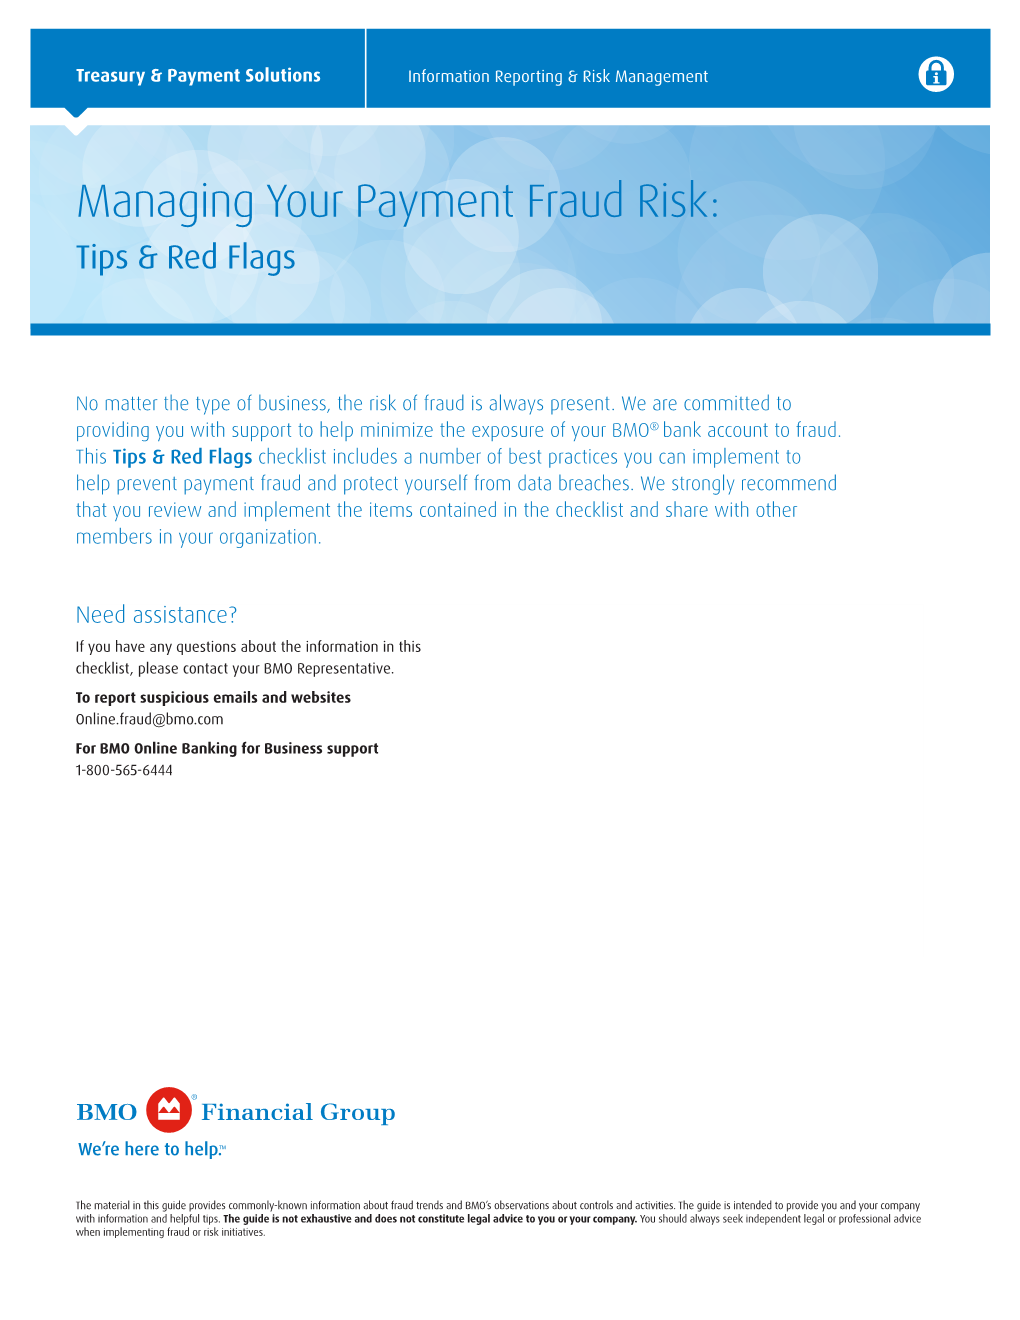 Managing Your Payment Fraud Risk: Tips & Red Flags